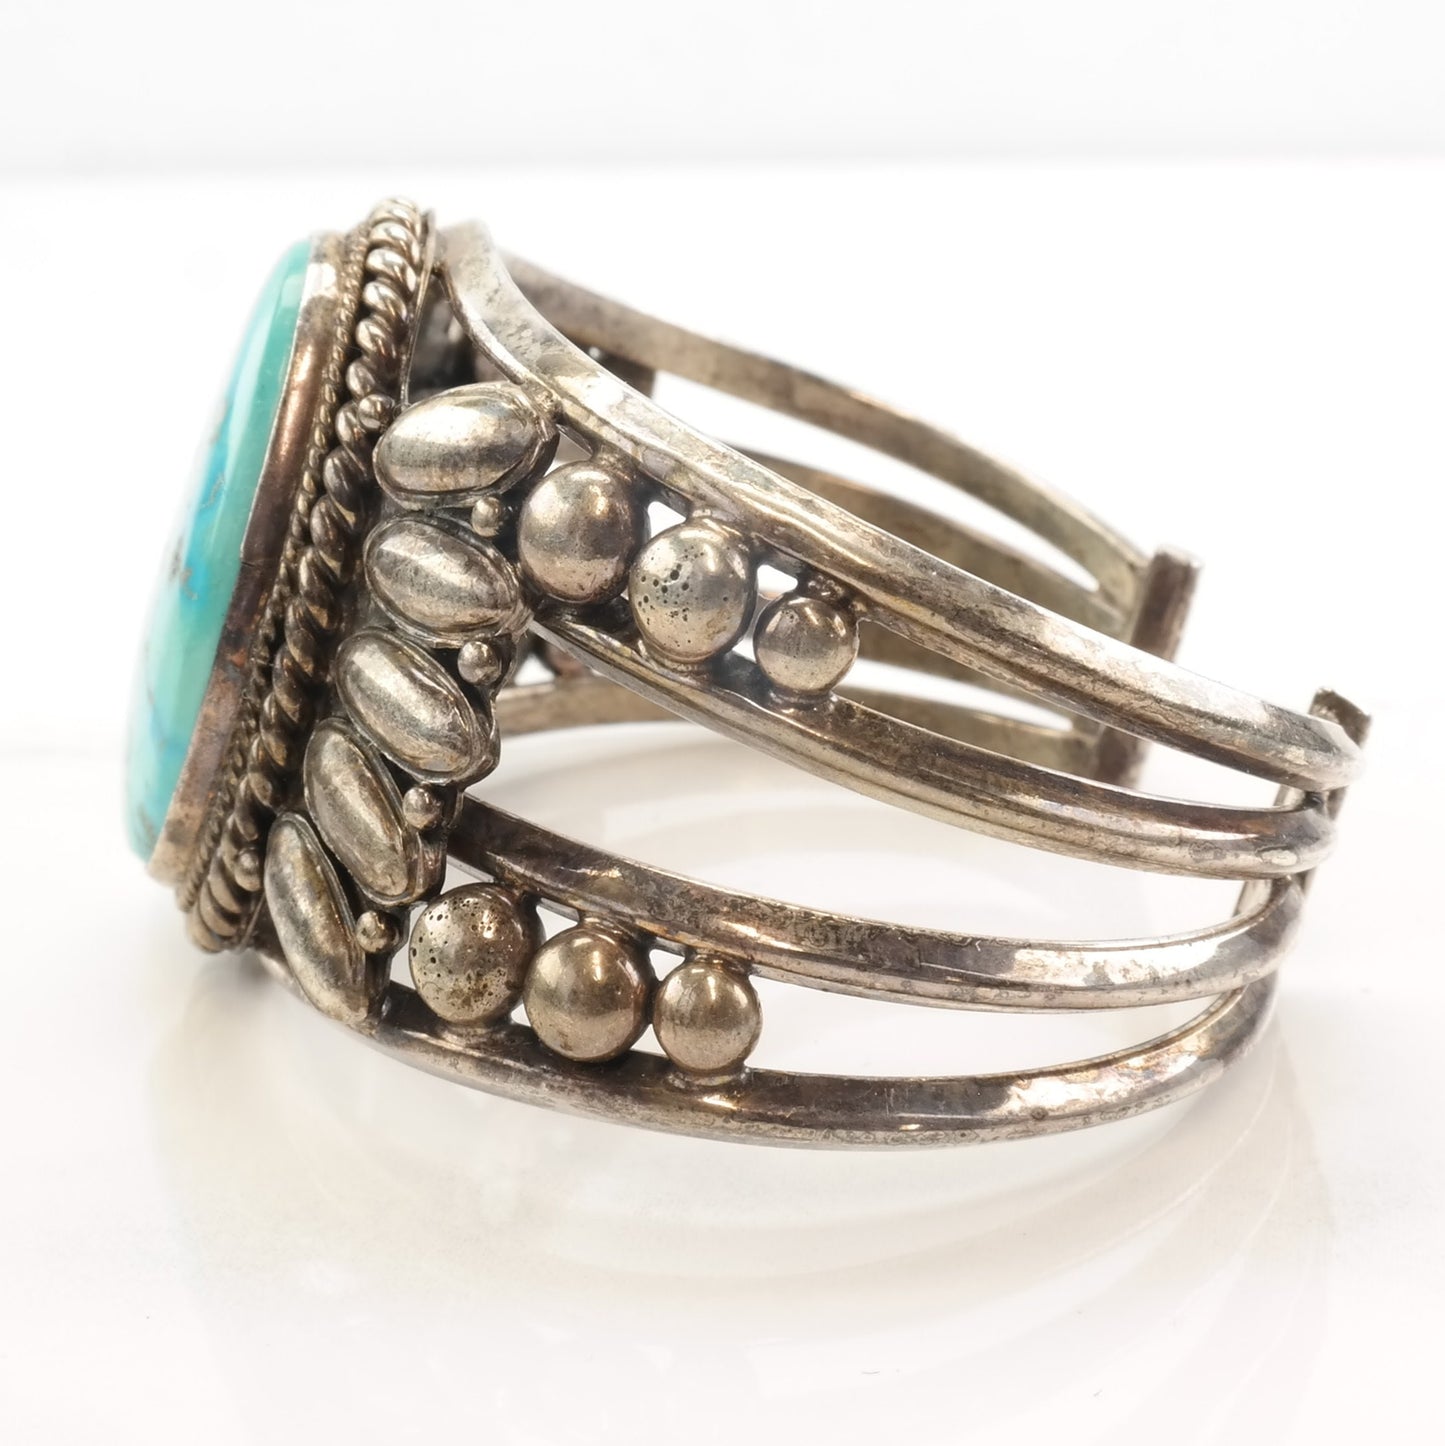 Native American Sterling Silver Turquoise Oval Cuff Bracelet